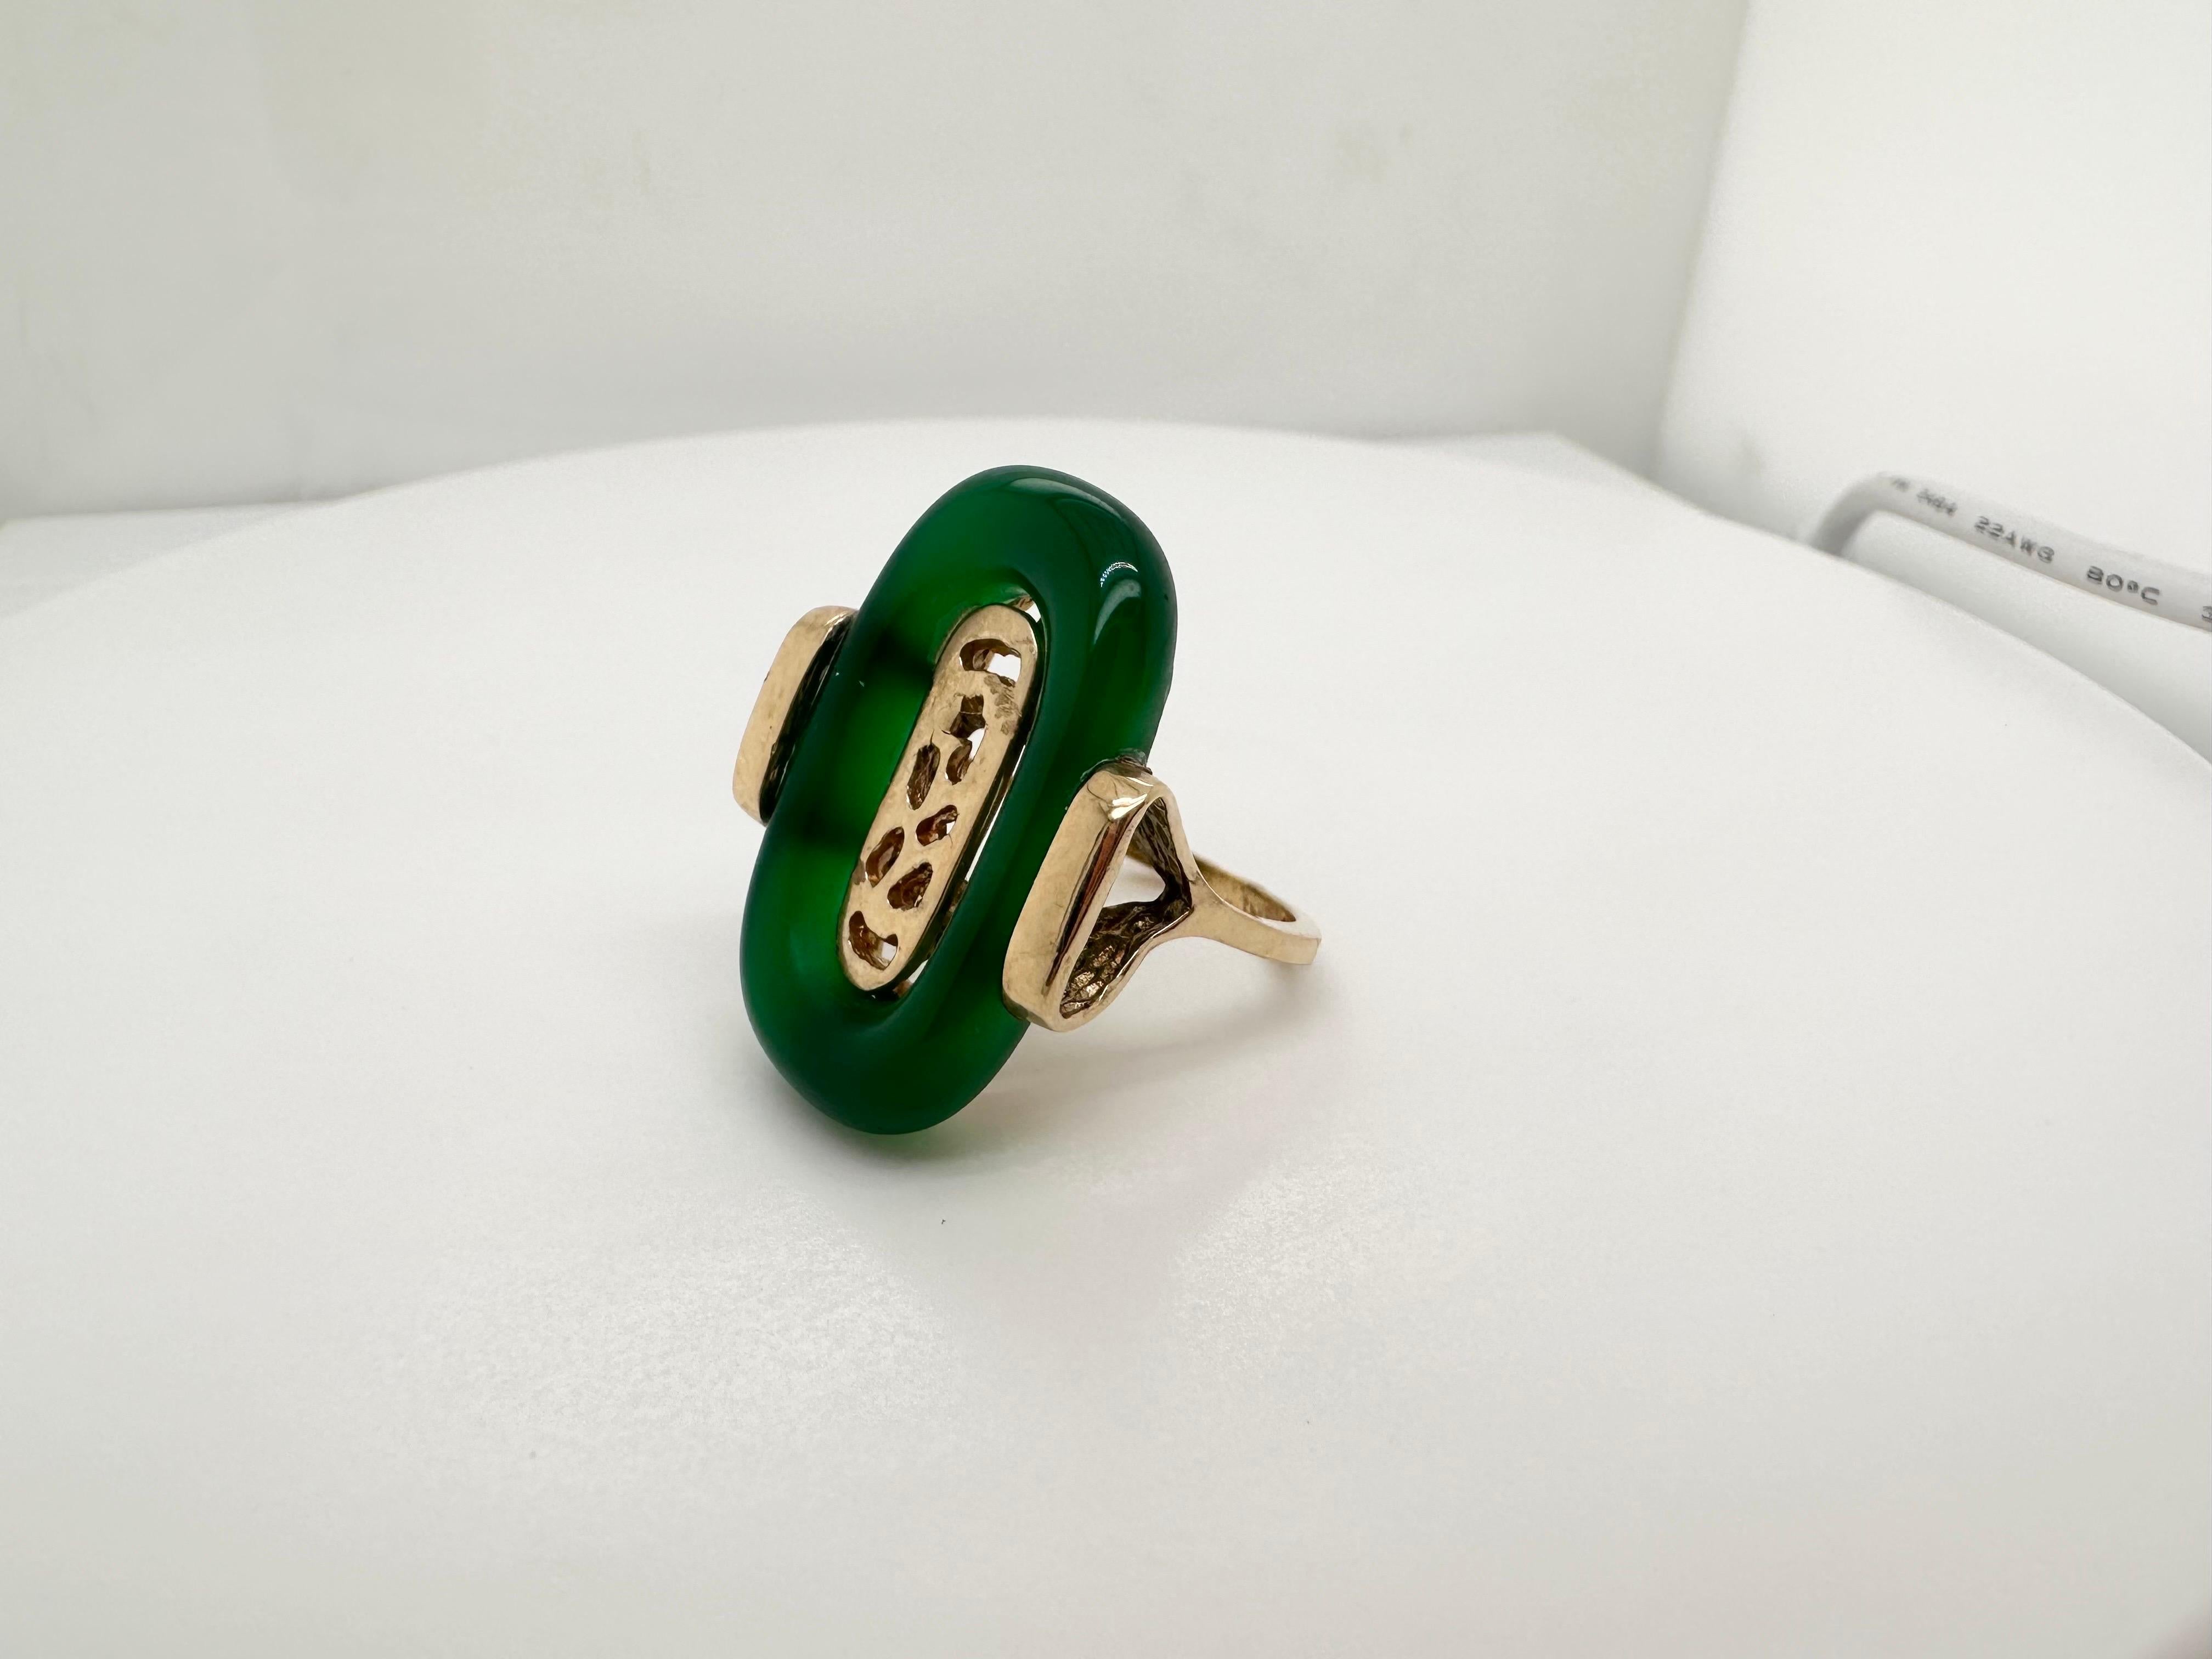 Green onyx modern ring 14KT yellow gold In Excellent Condition For Sale In Boca Raton, FL